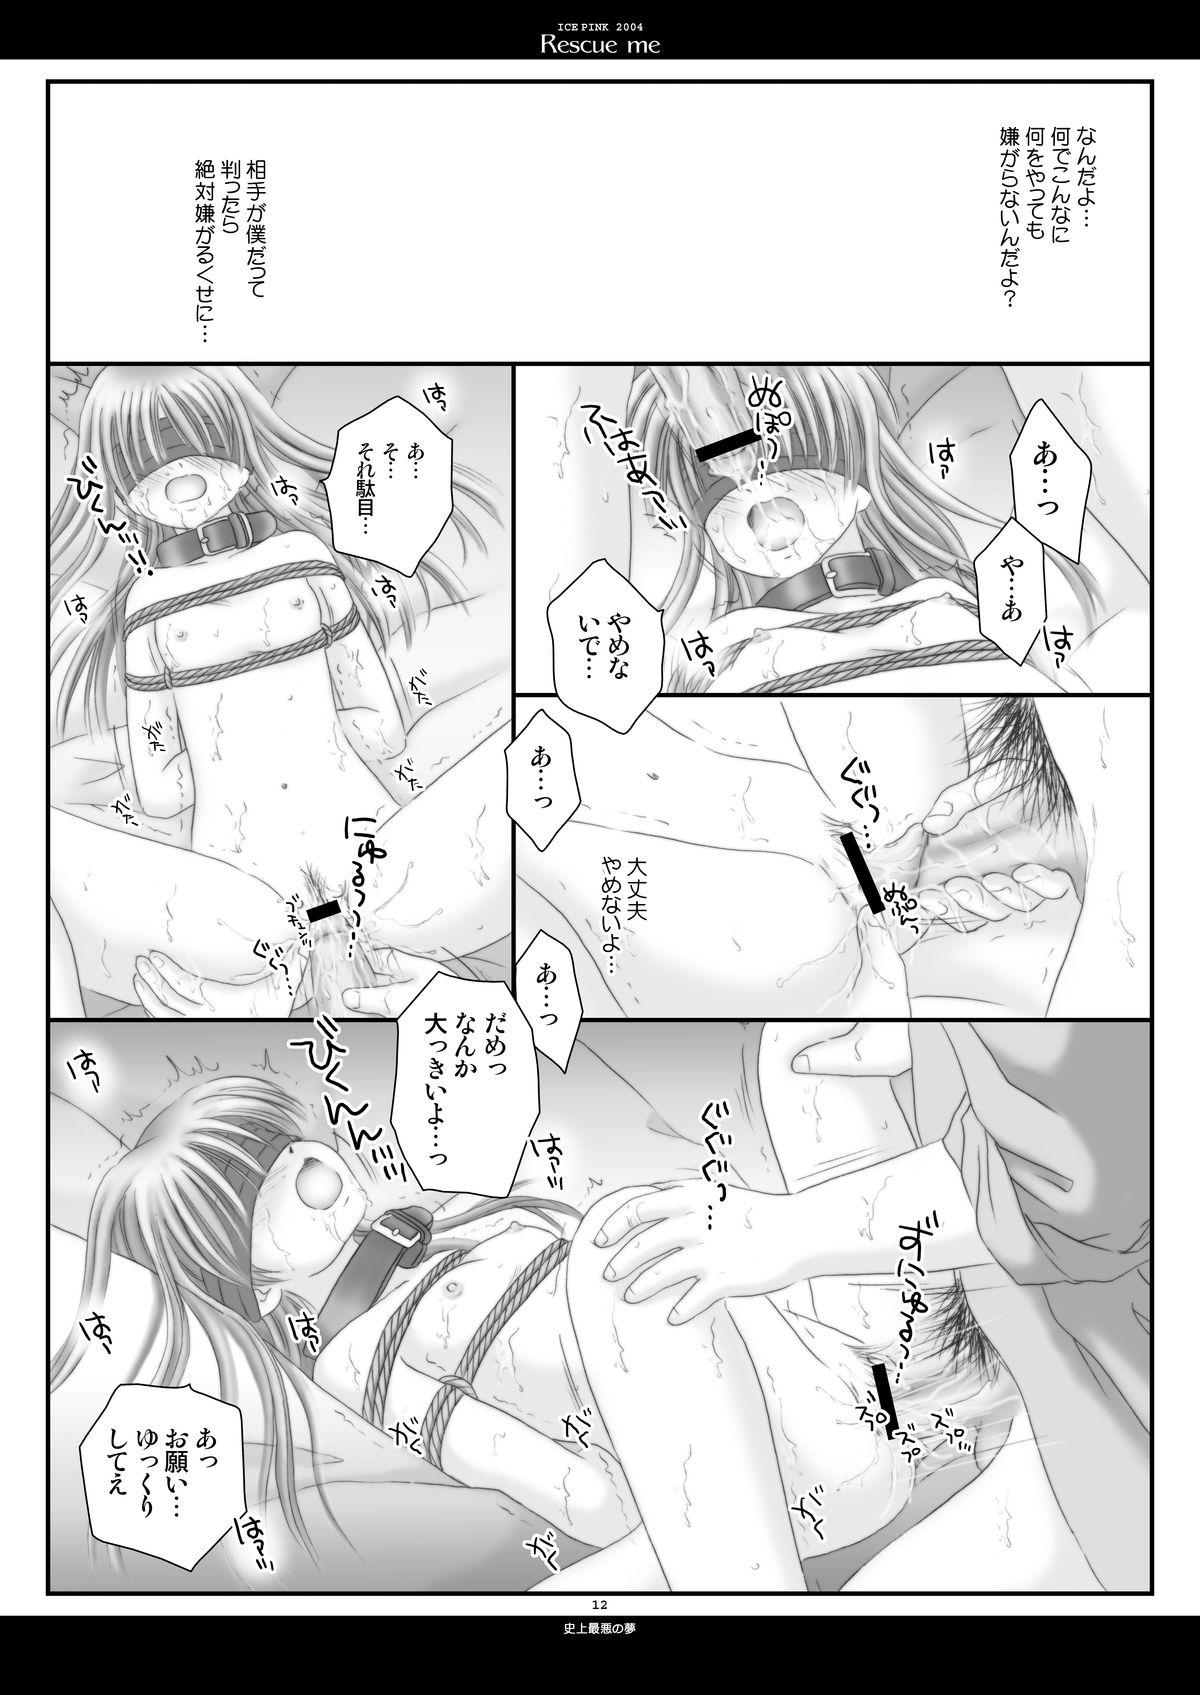 Rescue me Page 12 Of 36 hentai haven, Rescue me Page 12 Of 36 uncensored he...